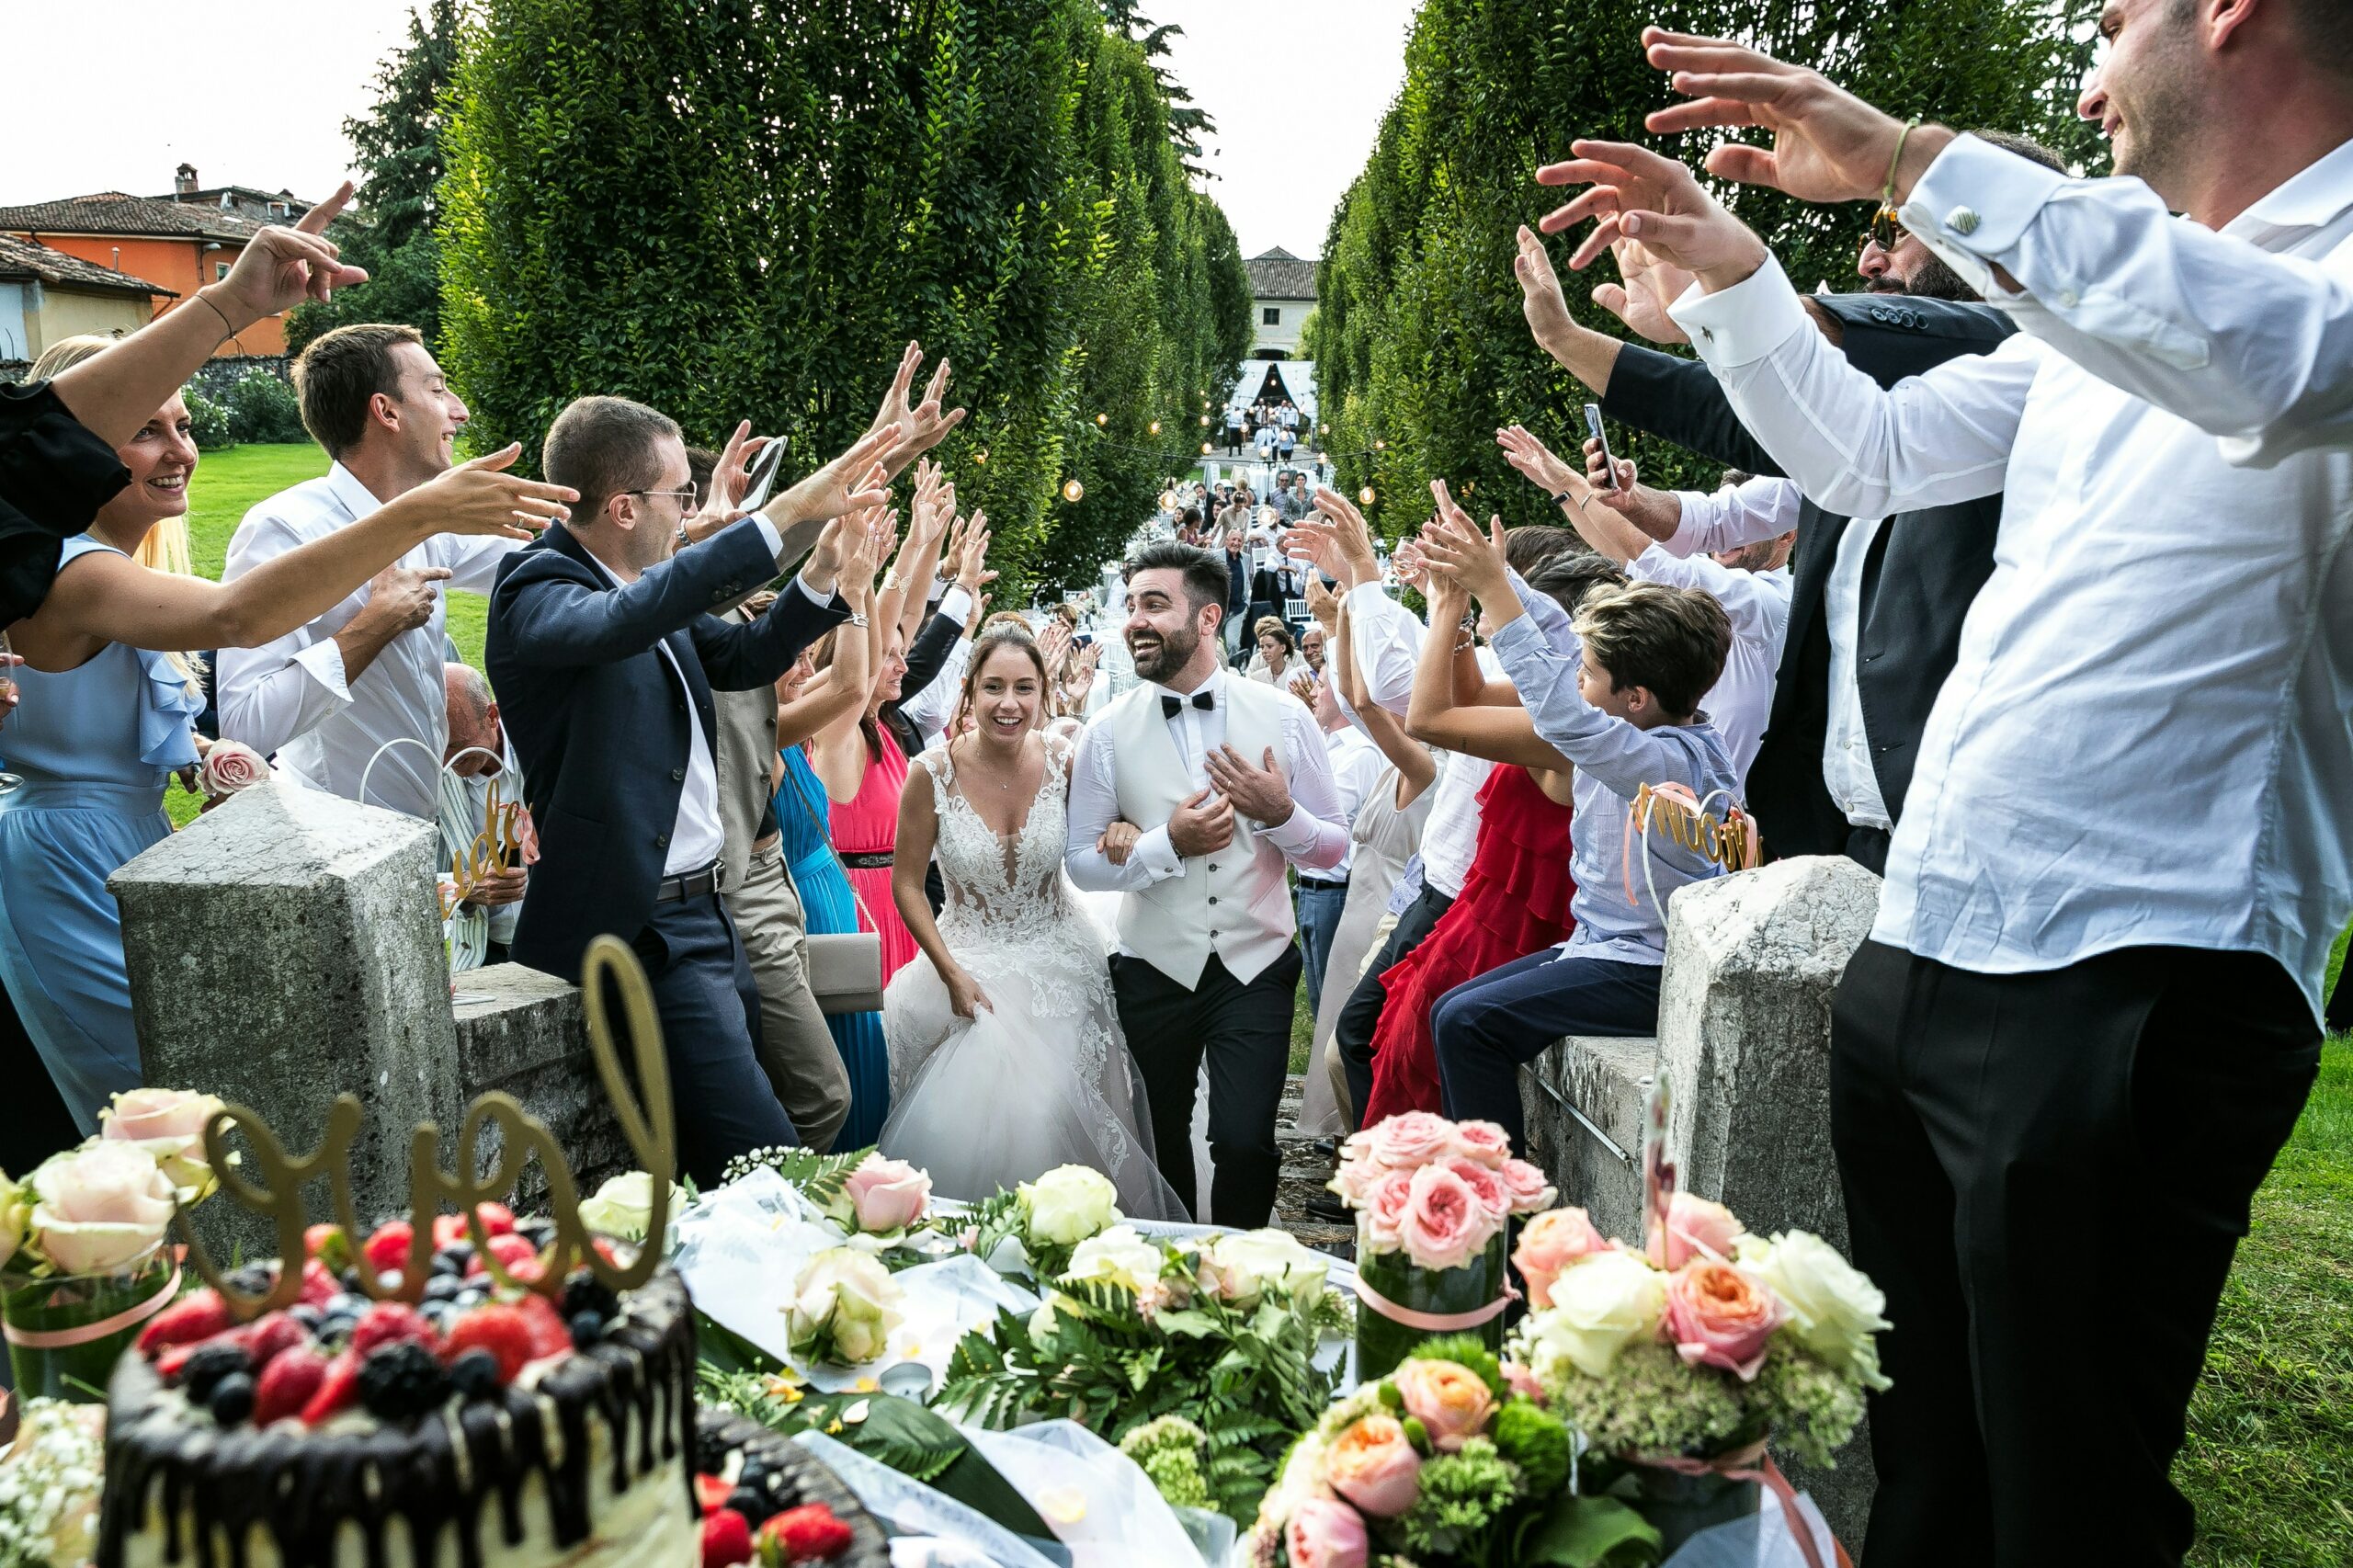 Here are our favorite wedding party entrance songs for your grand entrance as newlyweds.